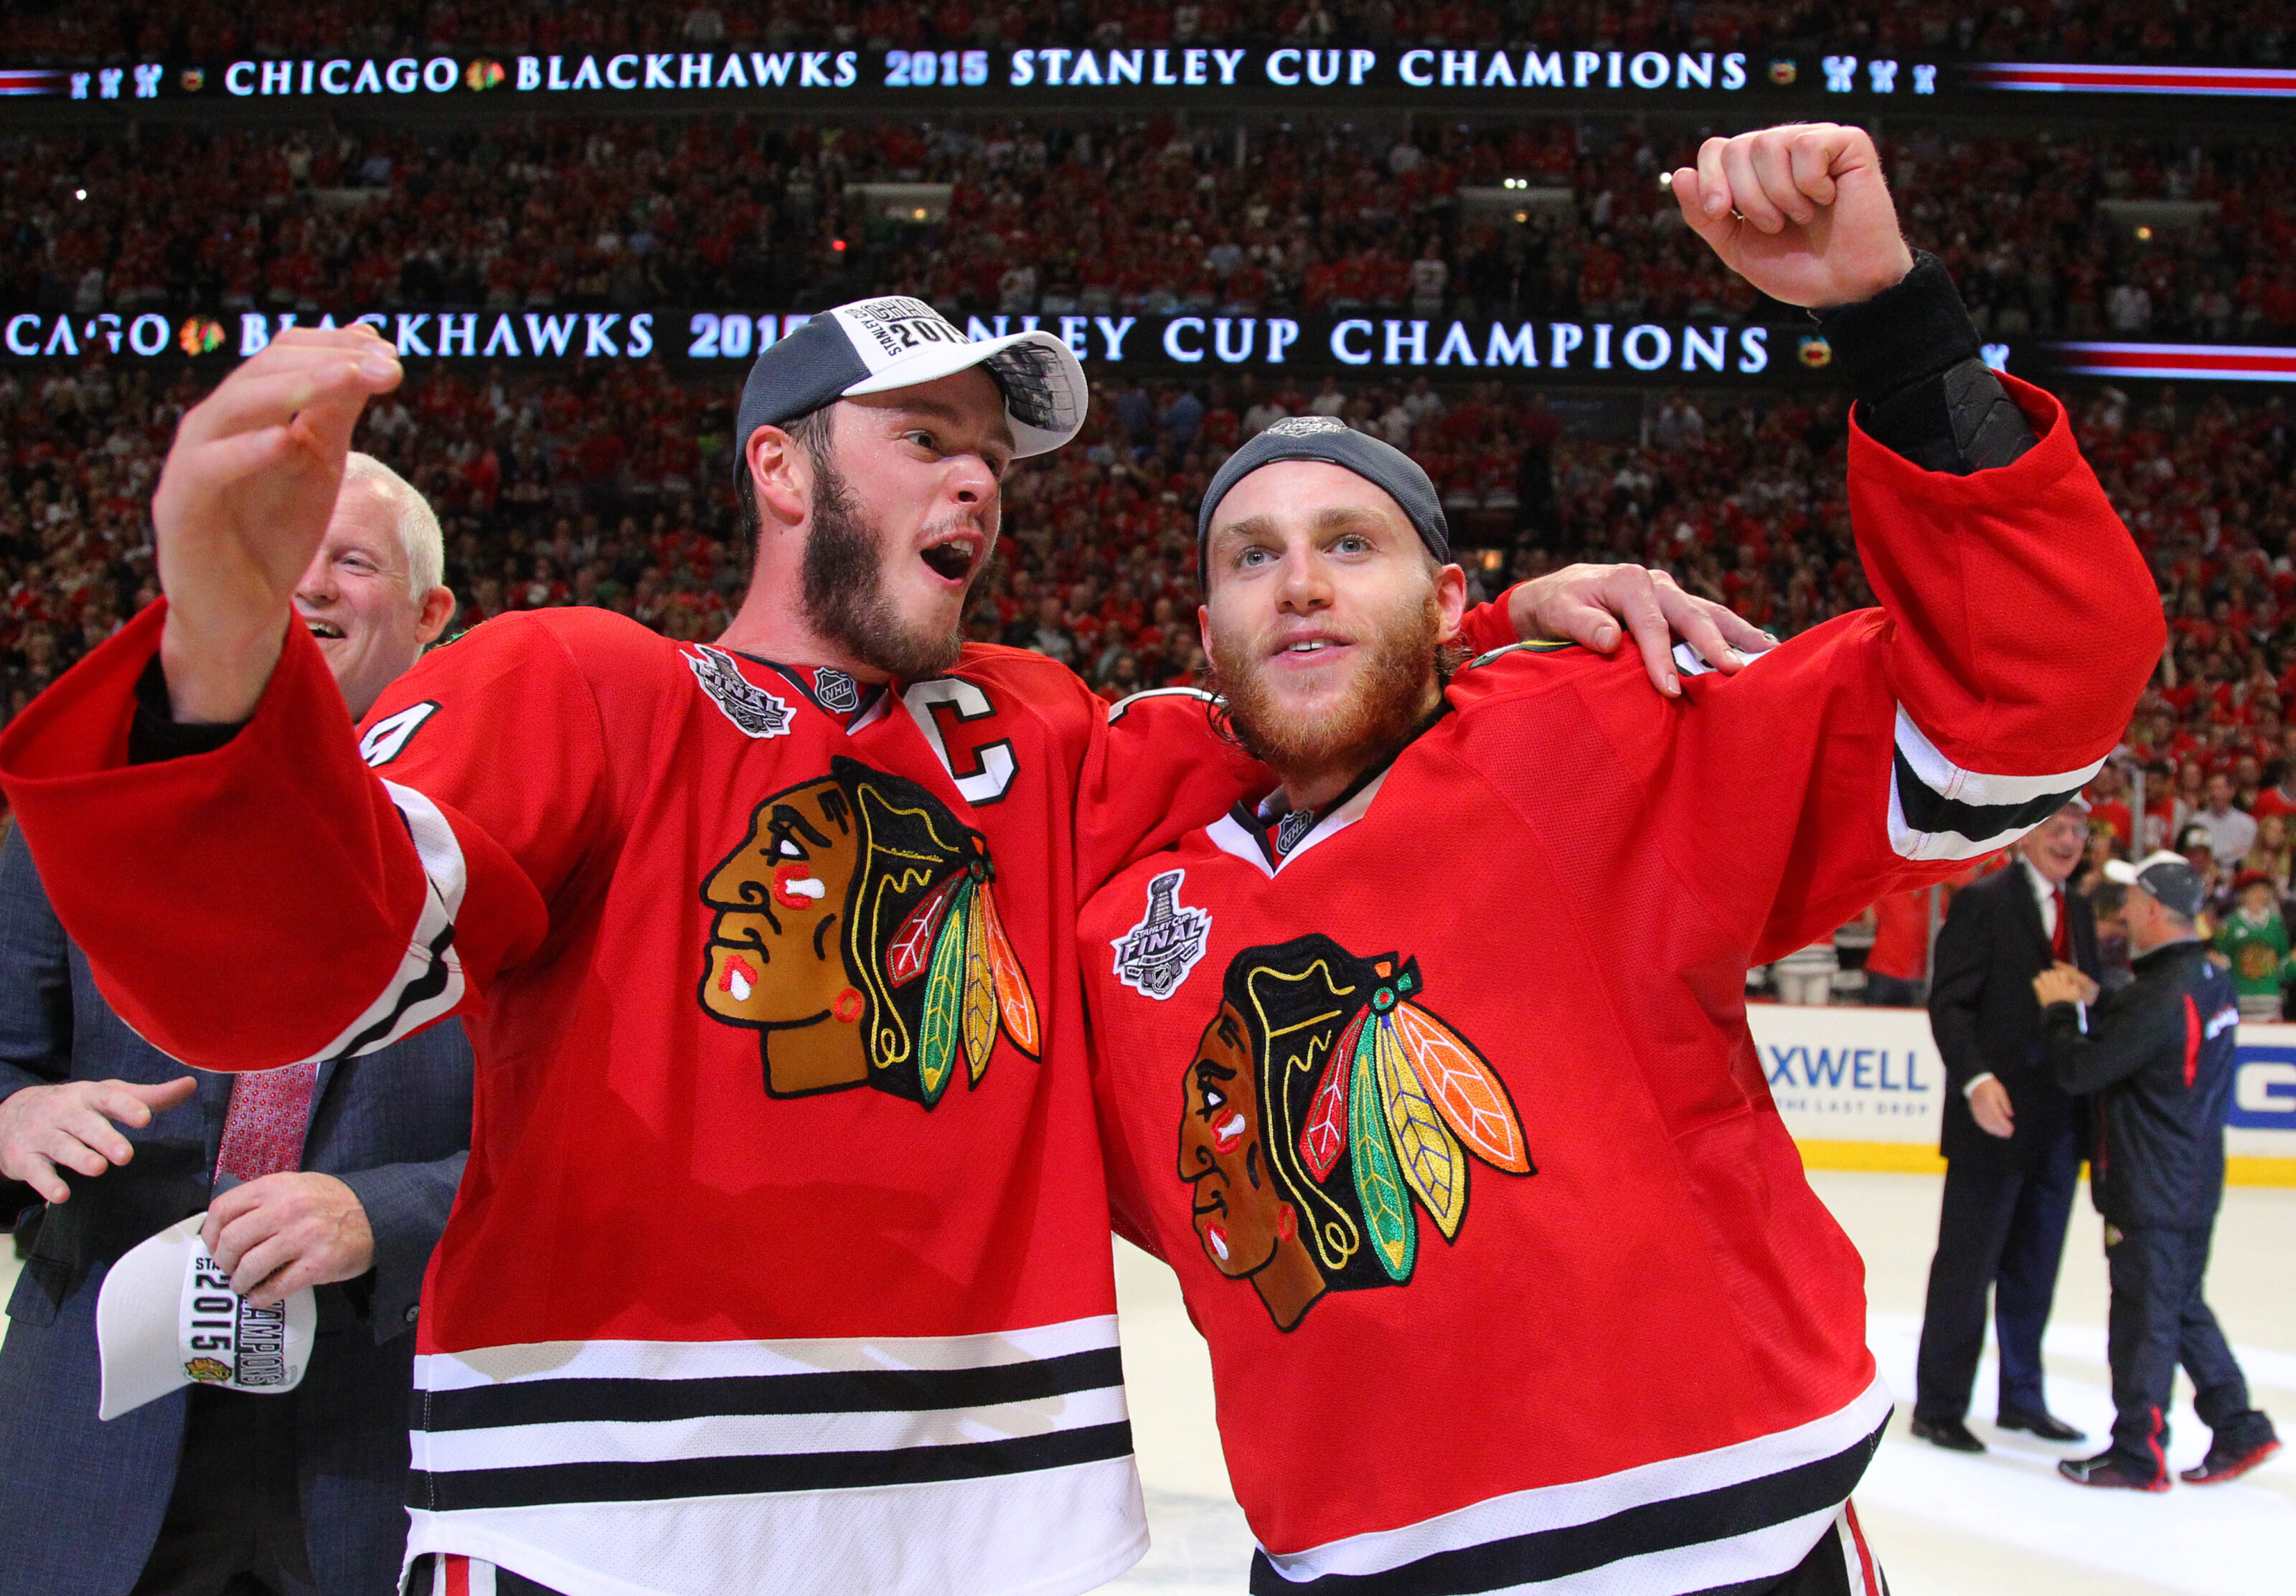 This Week in Chicago Blackhawks History: Two Stanley Cups won